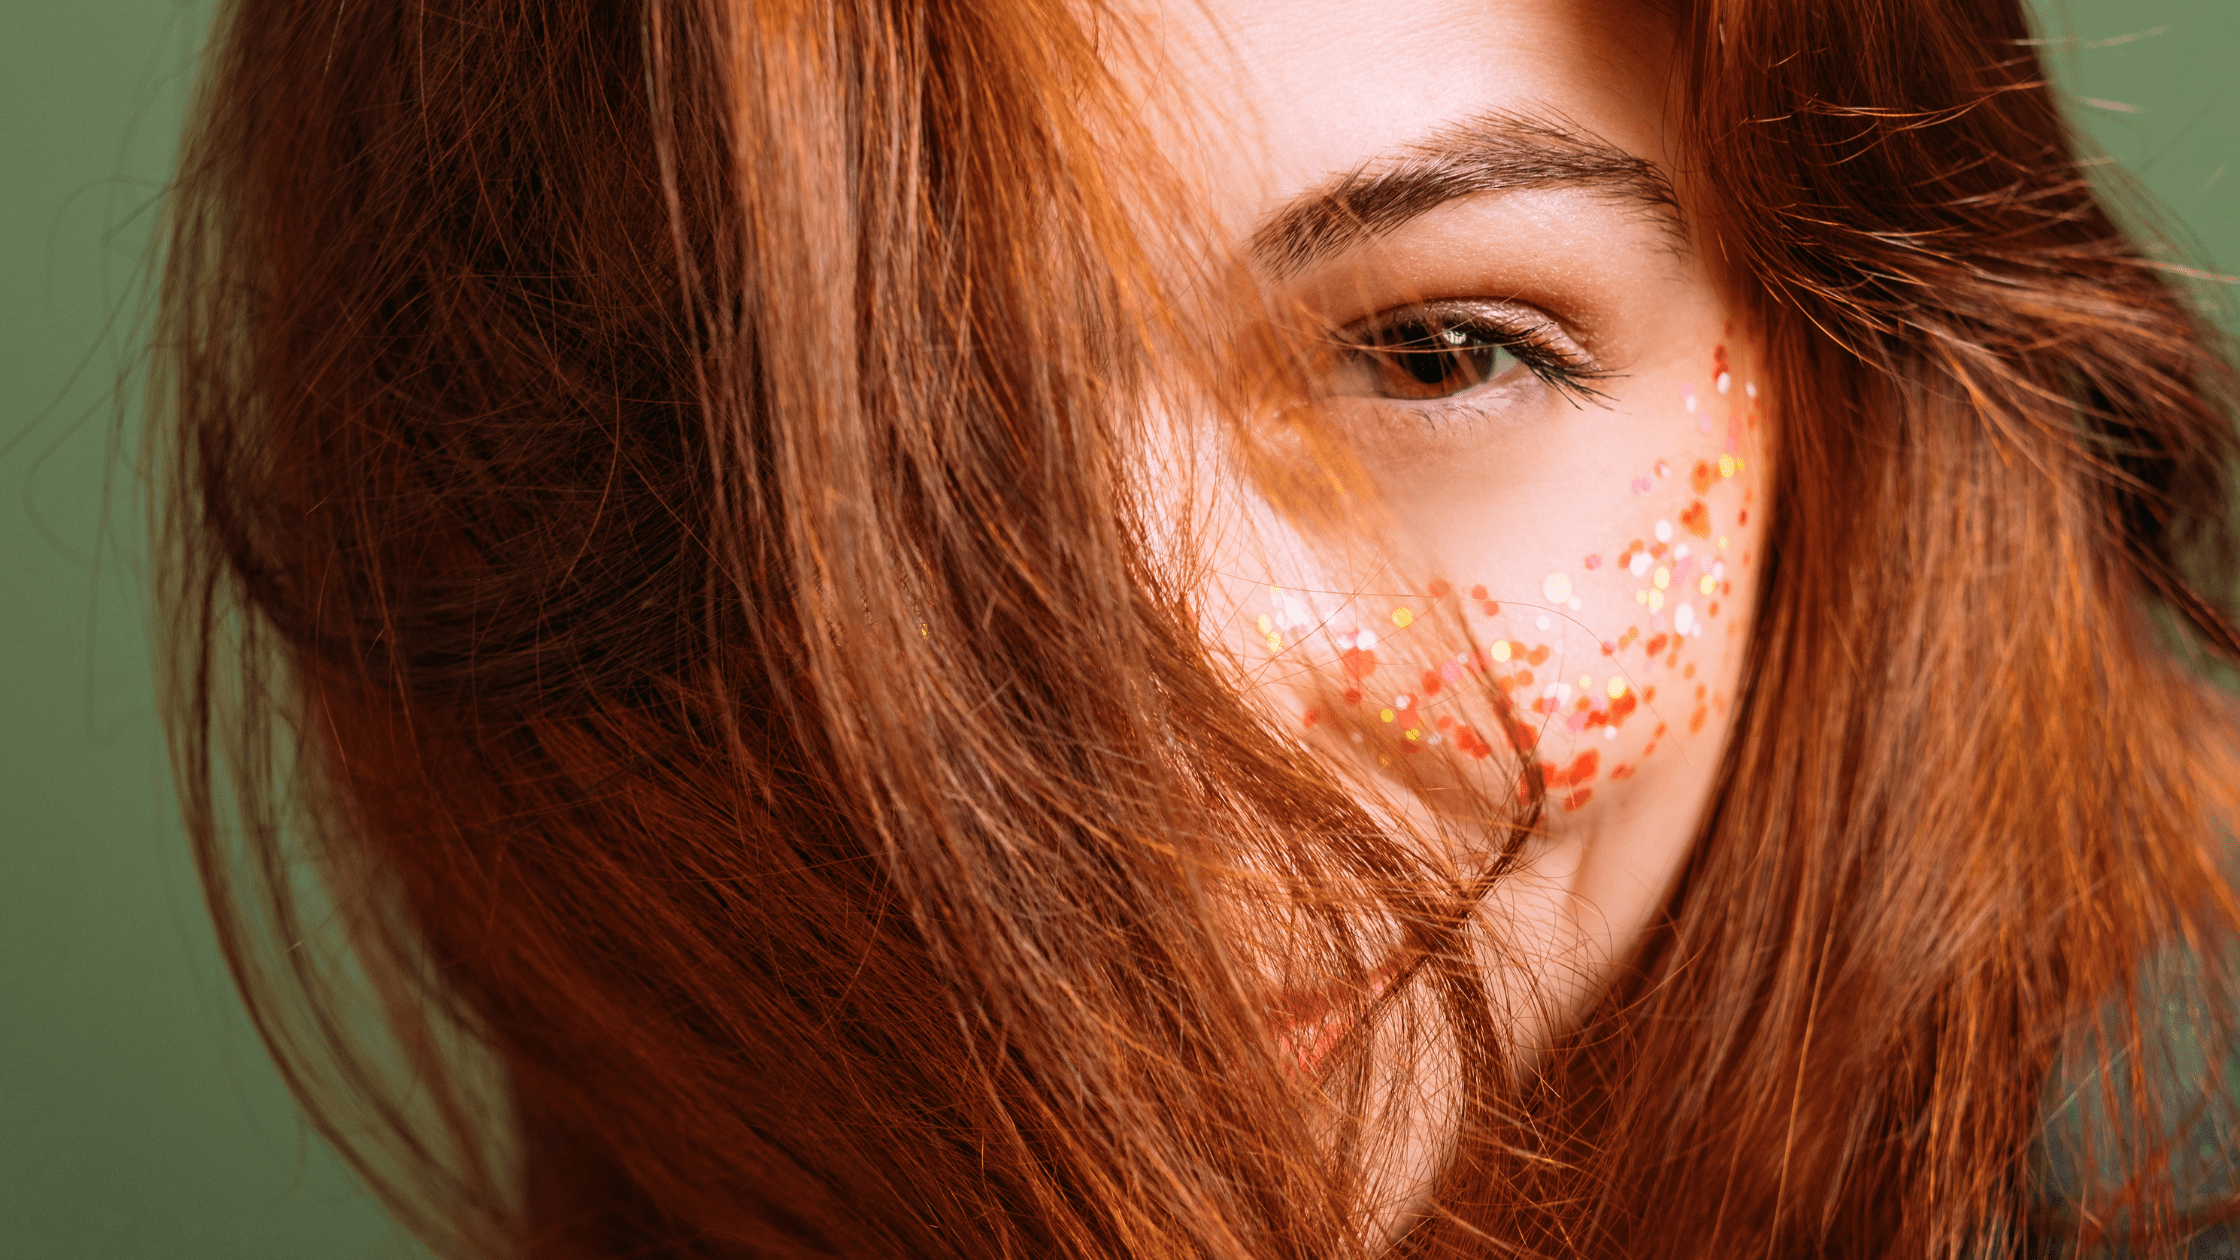 Opinion: It’s Okay to Dye Your Natural Red Hair, Regardless of What People Say